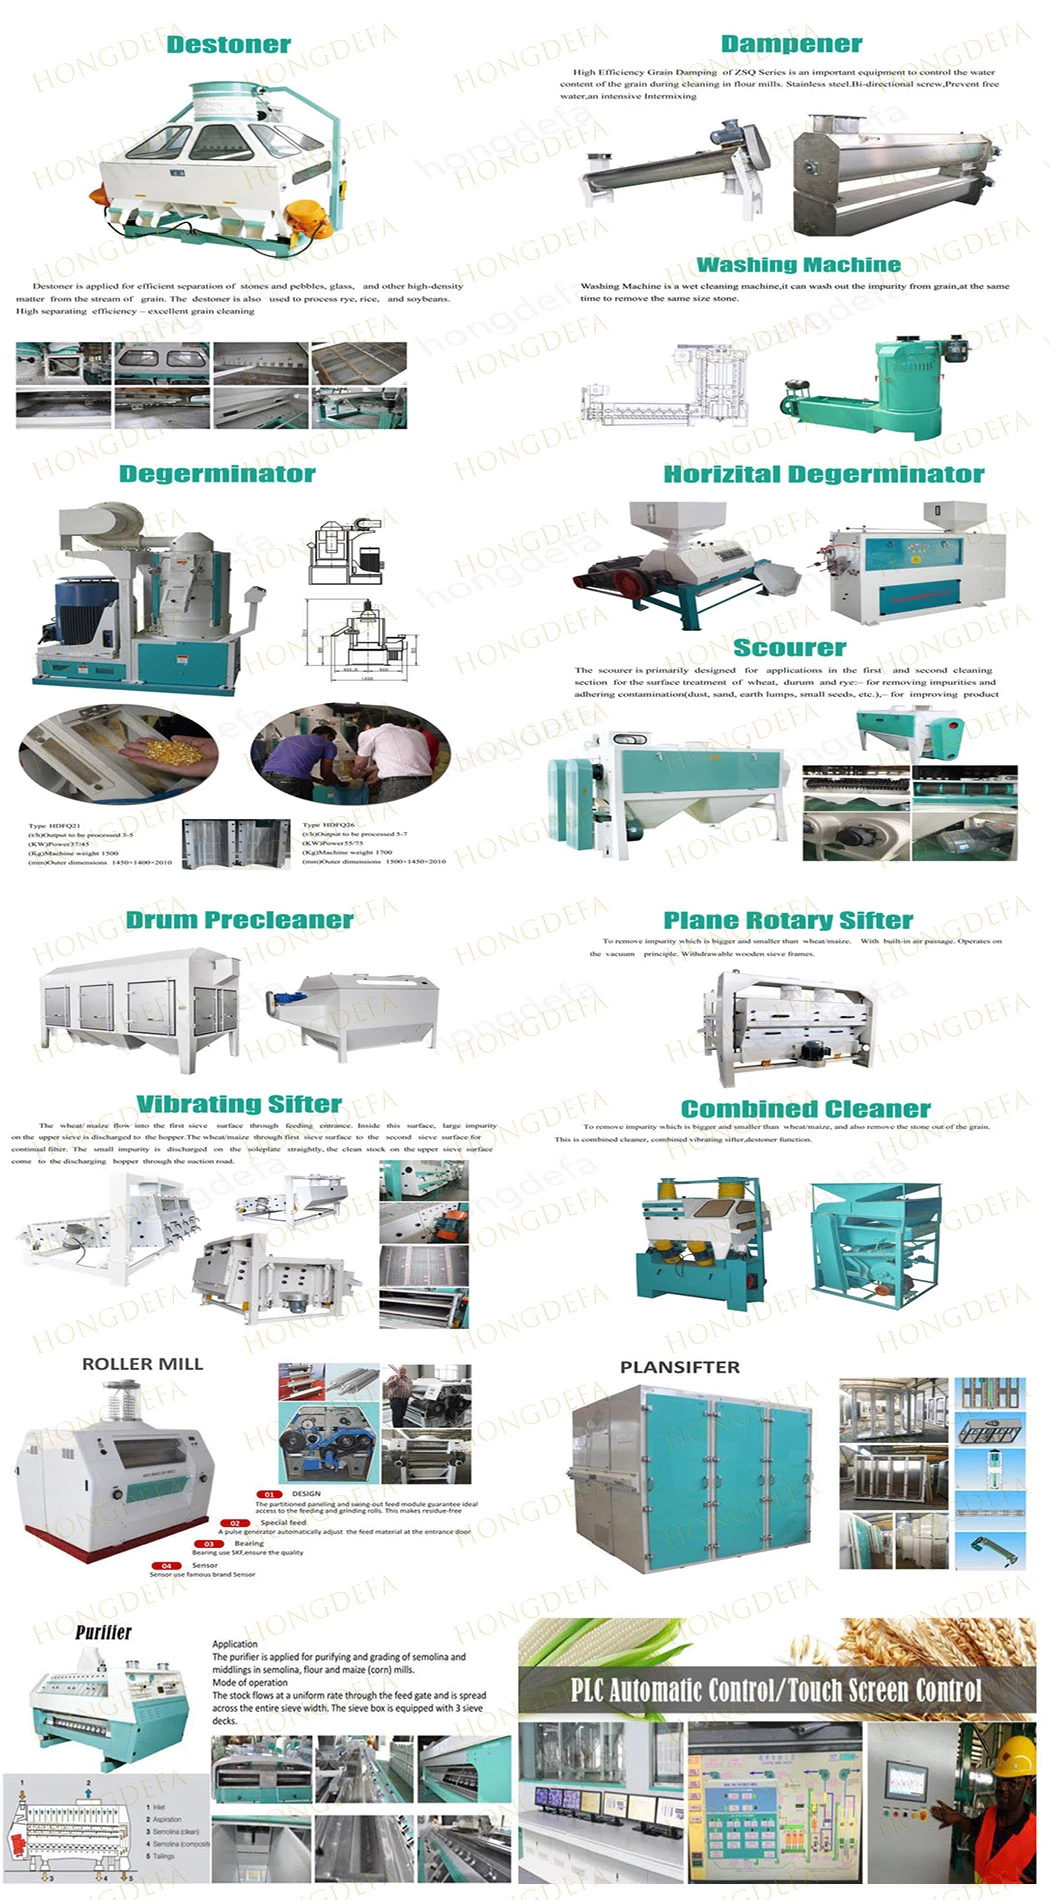 Spare Parts of Wheat Flour and Maize Milling Plant